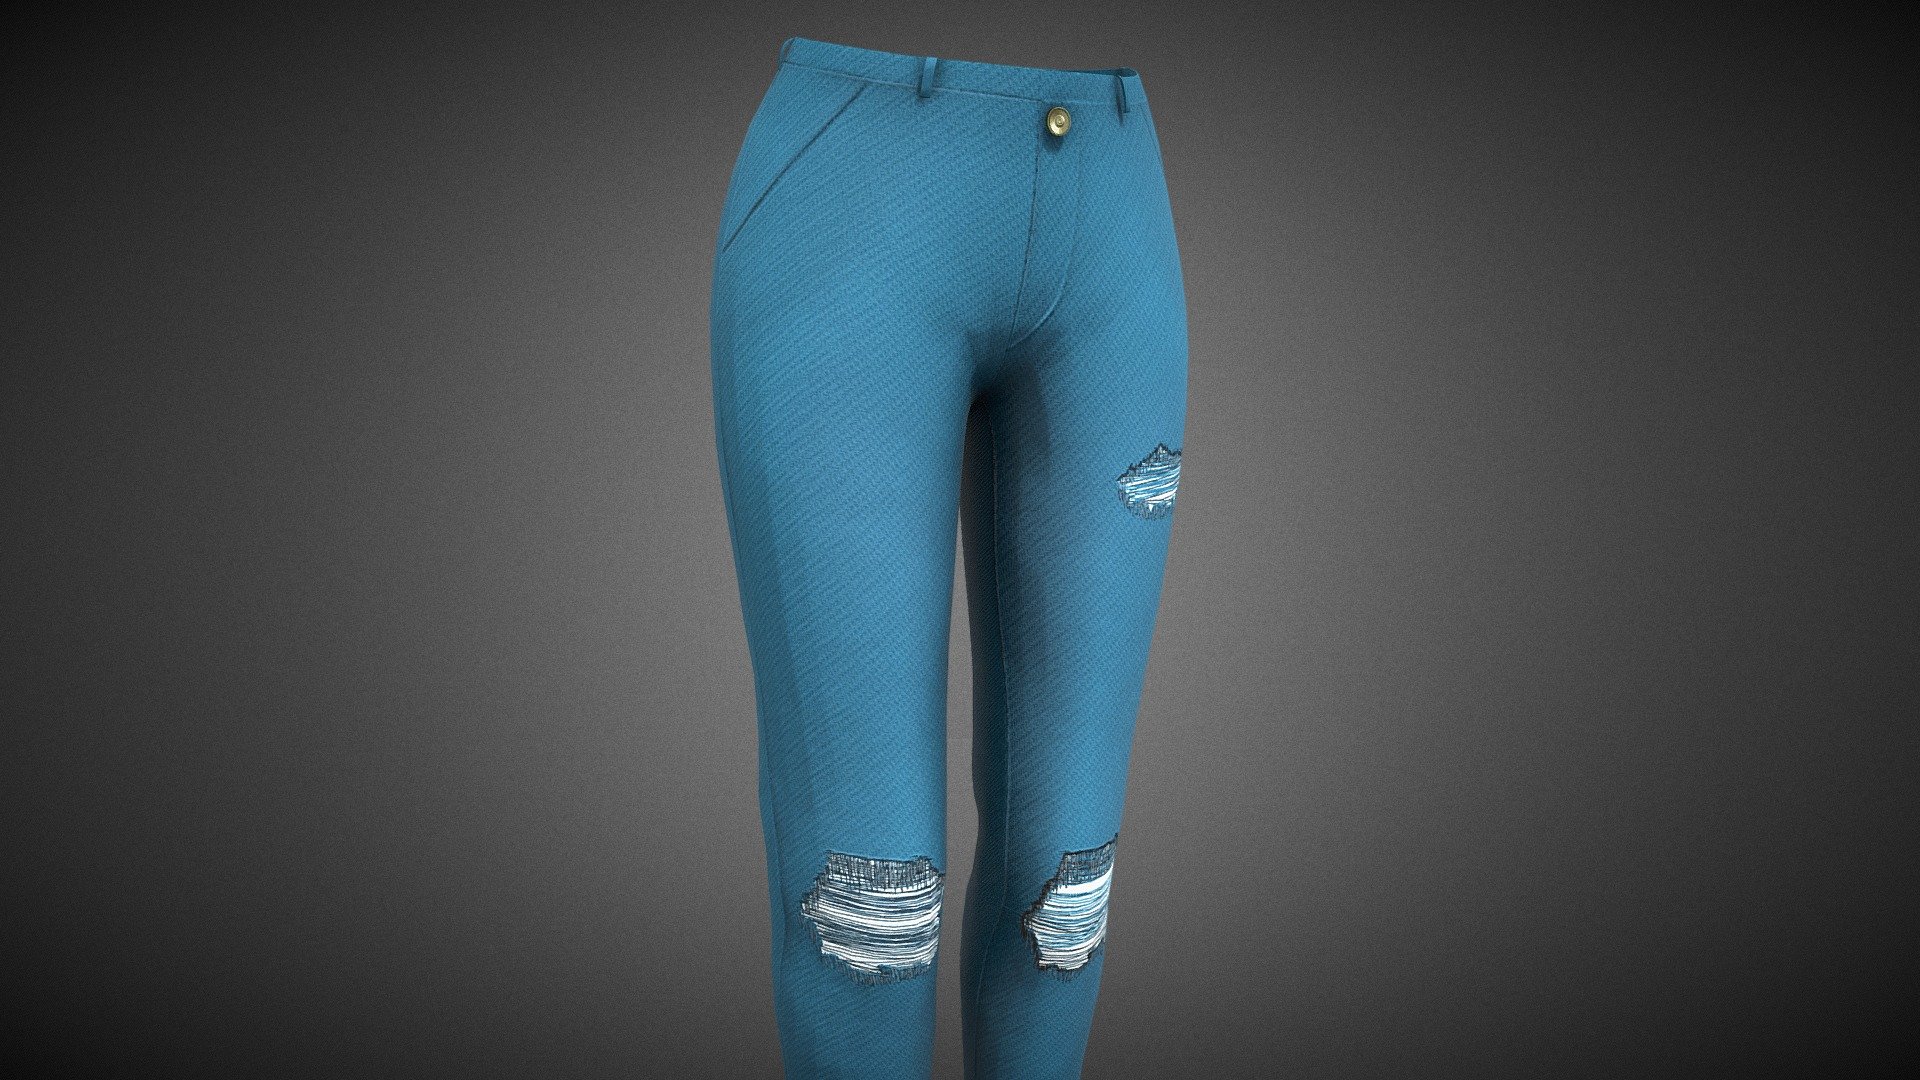 CG StudioX Present :
Female Light Blue Ripped Jeans Pants Style 2  lowpoly/PBR


This is Female Light Blue Ripped Jeans Pants Style 2  Comes with Specular and Metalness PBR.
The photo been rendered using Marmoset Toolbag 4 (real time game engine )

Features :

Comes with Specular and Metalness PBR 4K texture .
Good topology.
Low polygon geometry.
The Model is prefect for game for both Specular workflow as in Unity and Metalness as in Unreal engine .
The model also rendered using Marmoset Toolbag 4 with both Specular and Metalness PBR and also included in the product with the full texture.
The texture can be easily adjustable .

Texture :

One set of UV [Albedo -Normal-Metalness -Roughness-Gloss-Specular-Ao] (4096*4096)
The Alpha map is included within the Albedo map, it's on the Alpha channel.

Files :
Marmoset Toolbag 4 ,Maya,,FBX,glTF,Blender,OBj with all the textures.


Contact me for if you have any questions.
 - Female Light Blue Ripped Jeans Pants Style 2 - Buy Royalty Free 3D model by CG StudioX (@CG_StudioX) 3d model